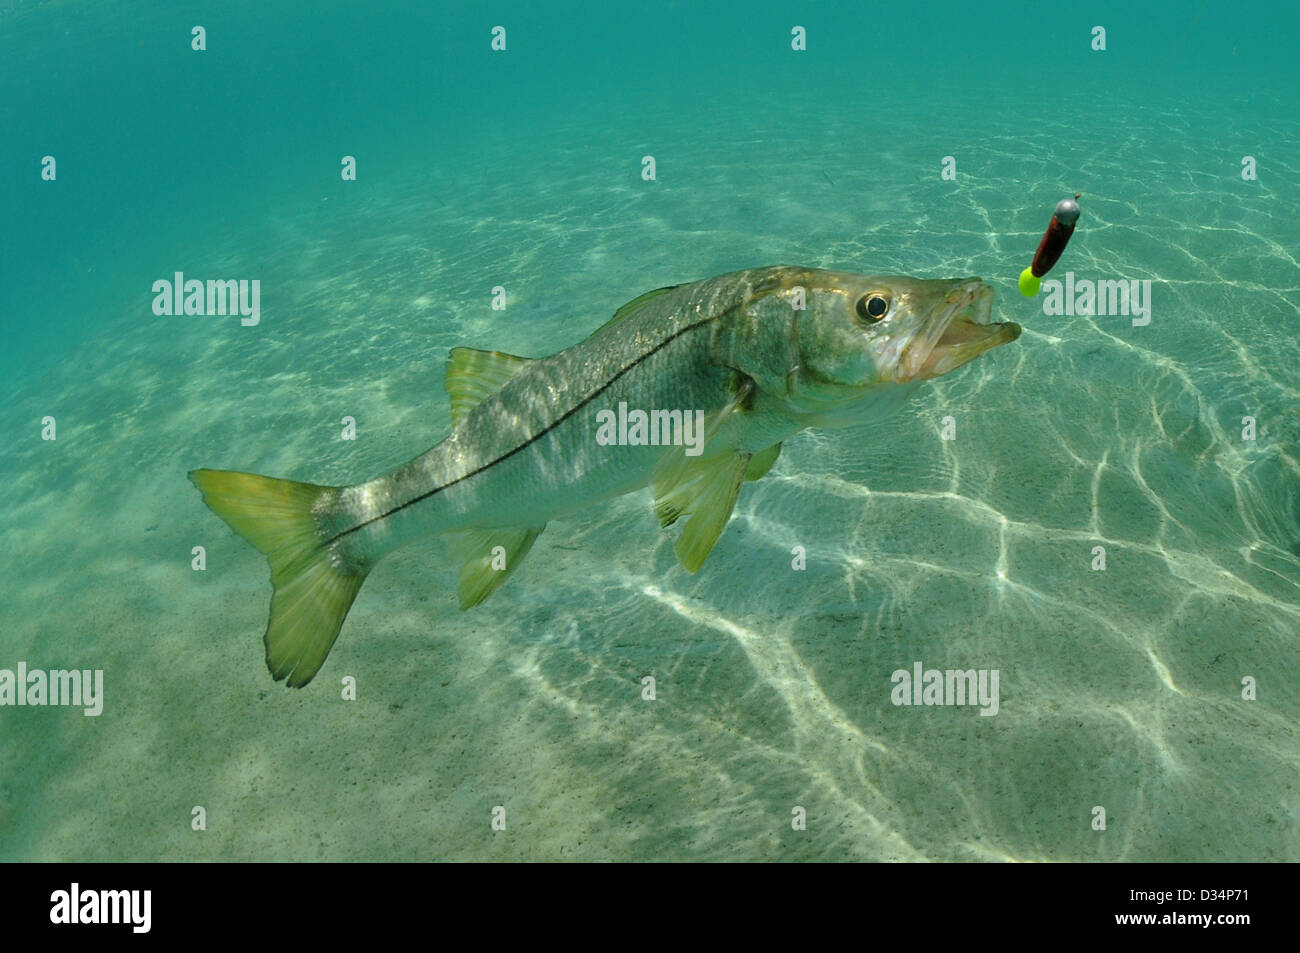 Snook in ocean chasing lure while fishing Stock Photo